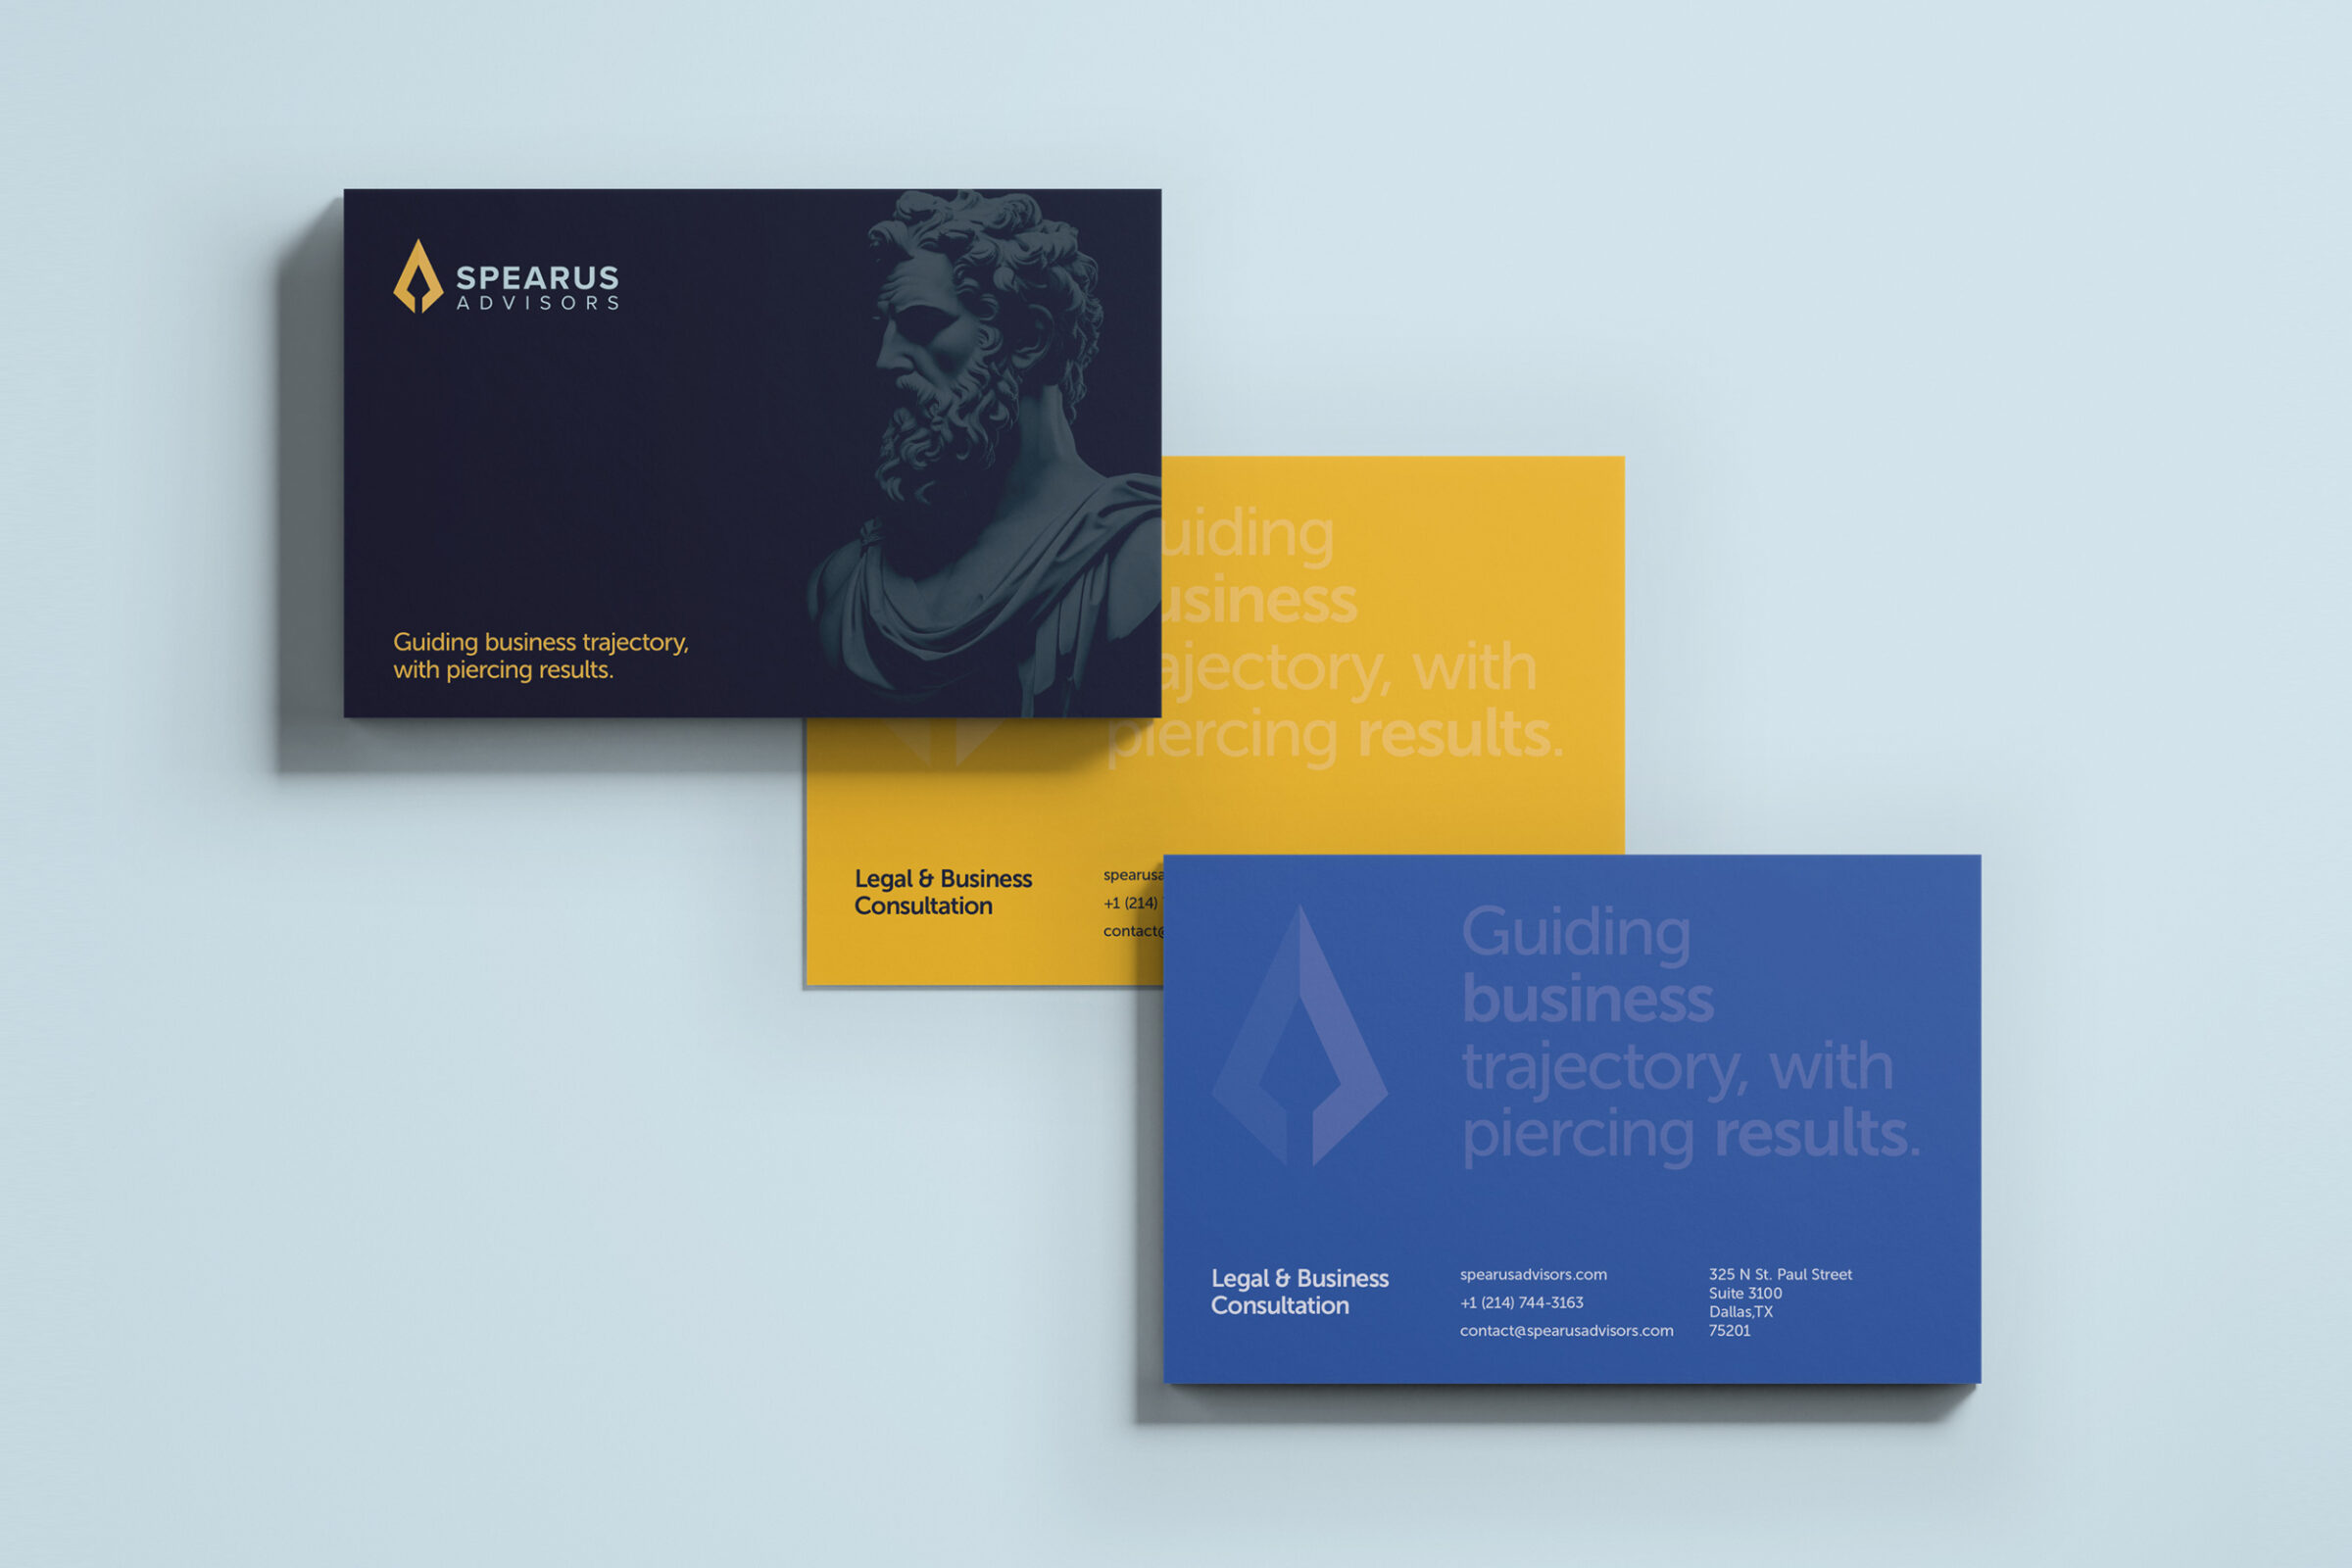 Spearus branding on business cards